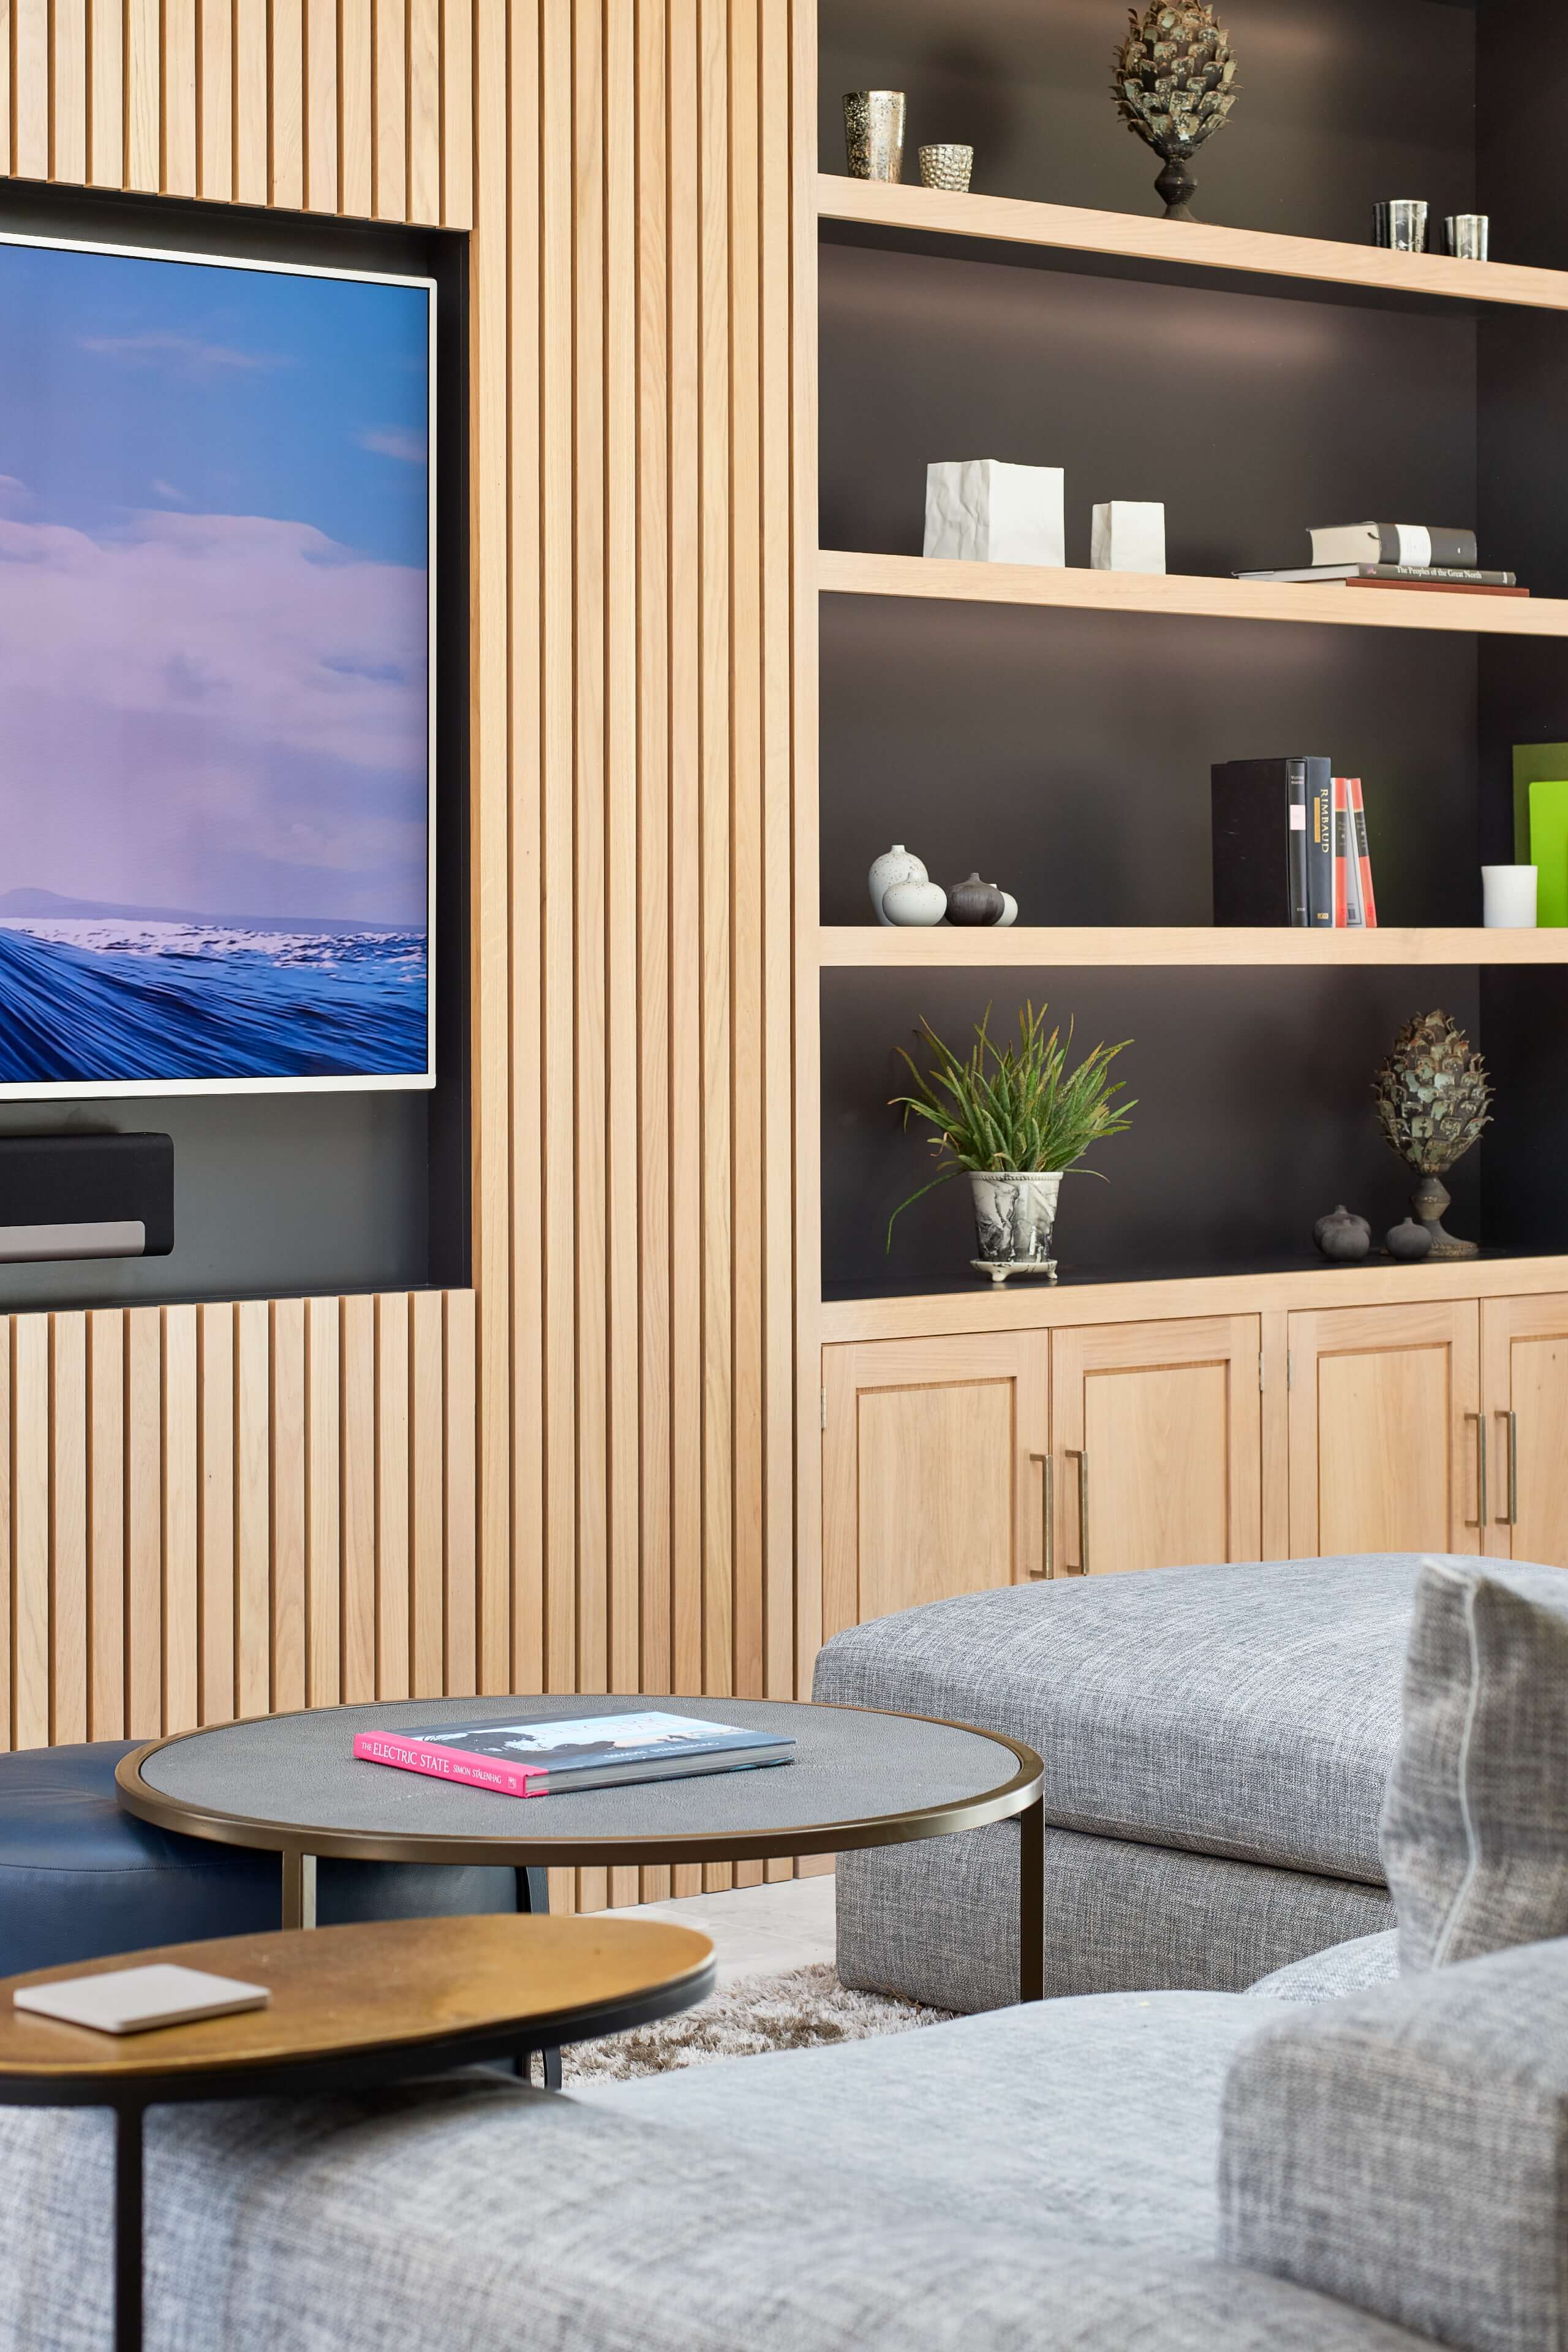 Slatted oak detailing around the wall mounted TV